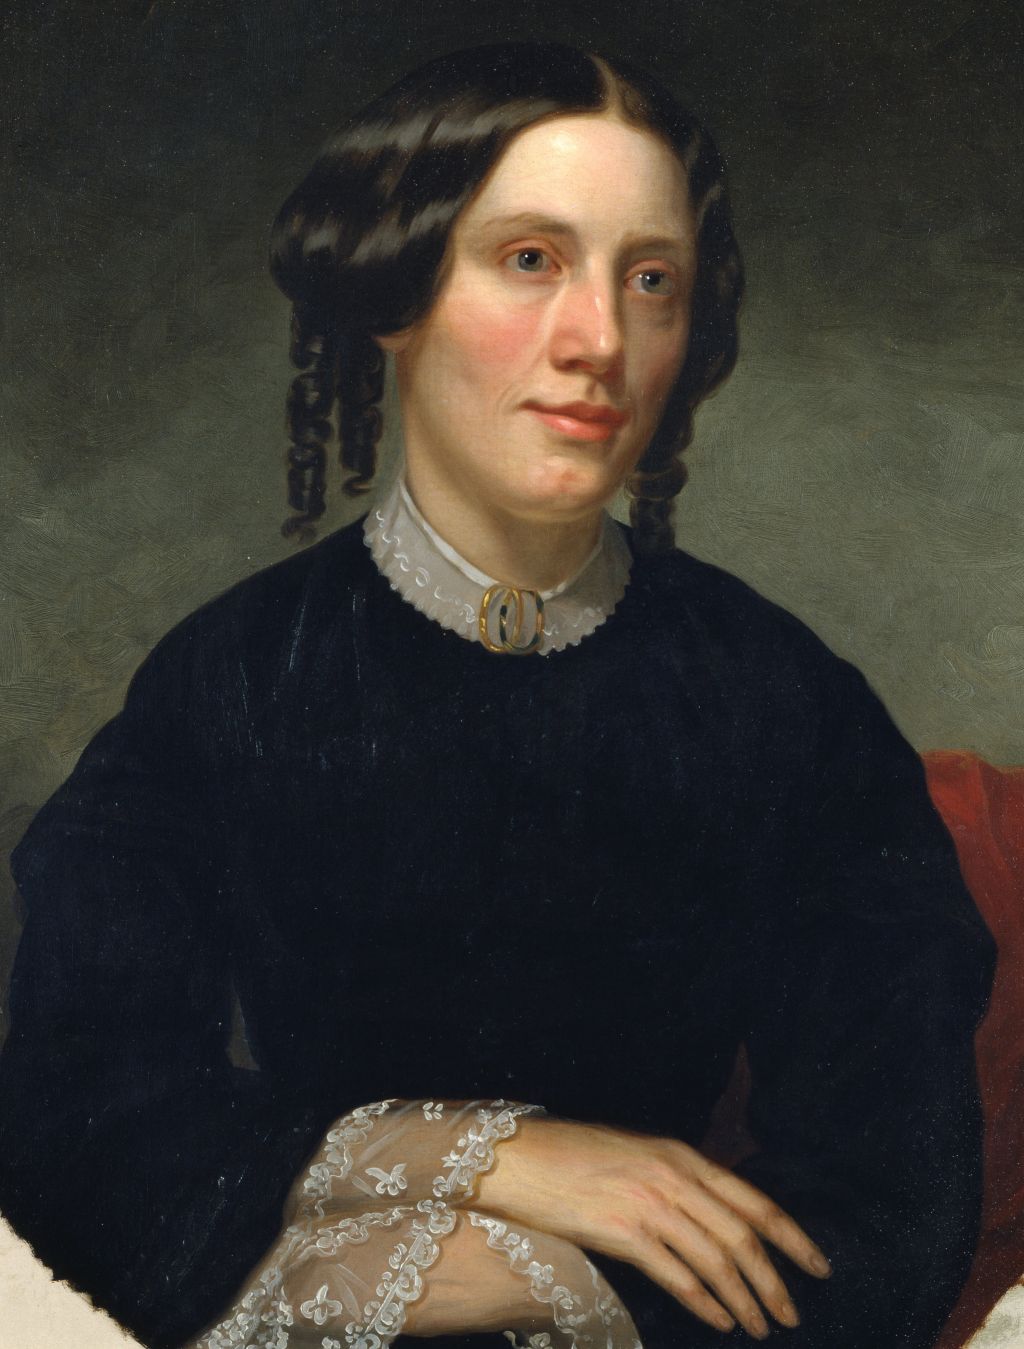 Alanson Fisher painted Harriet Beecher Stowe in 1853. National Portrait Gallery, Smithsonian Institution.